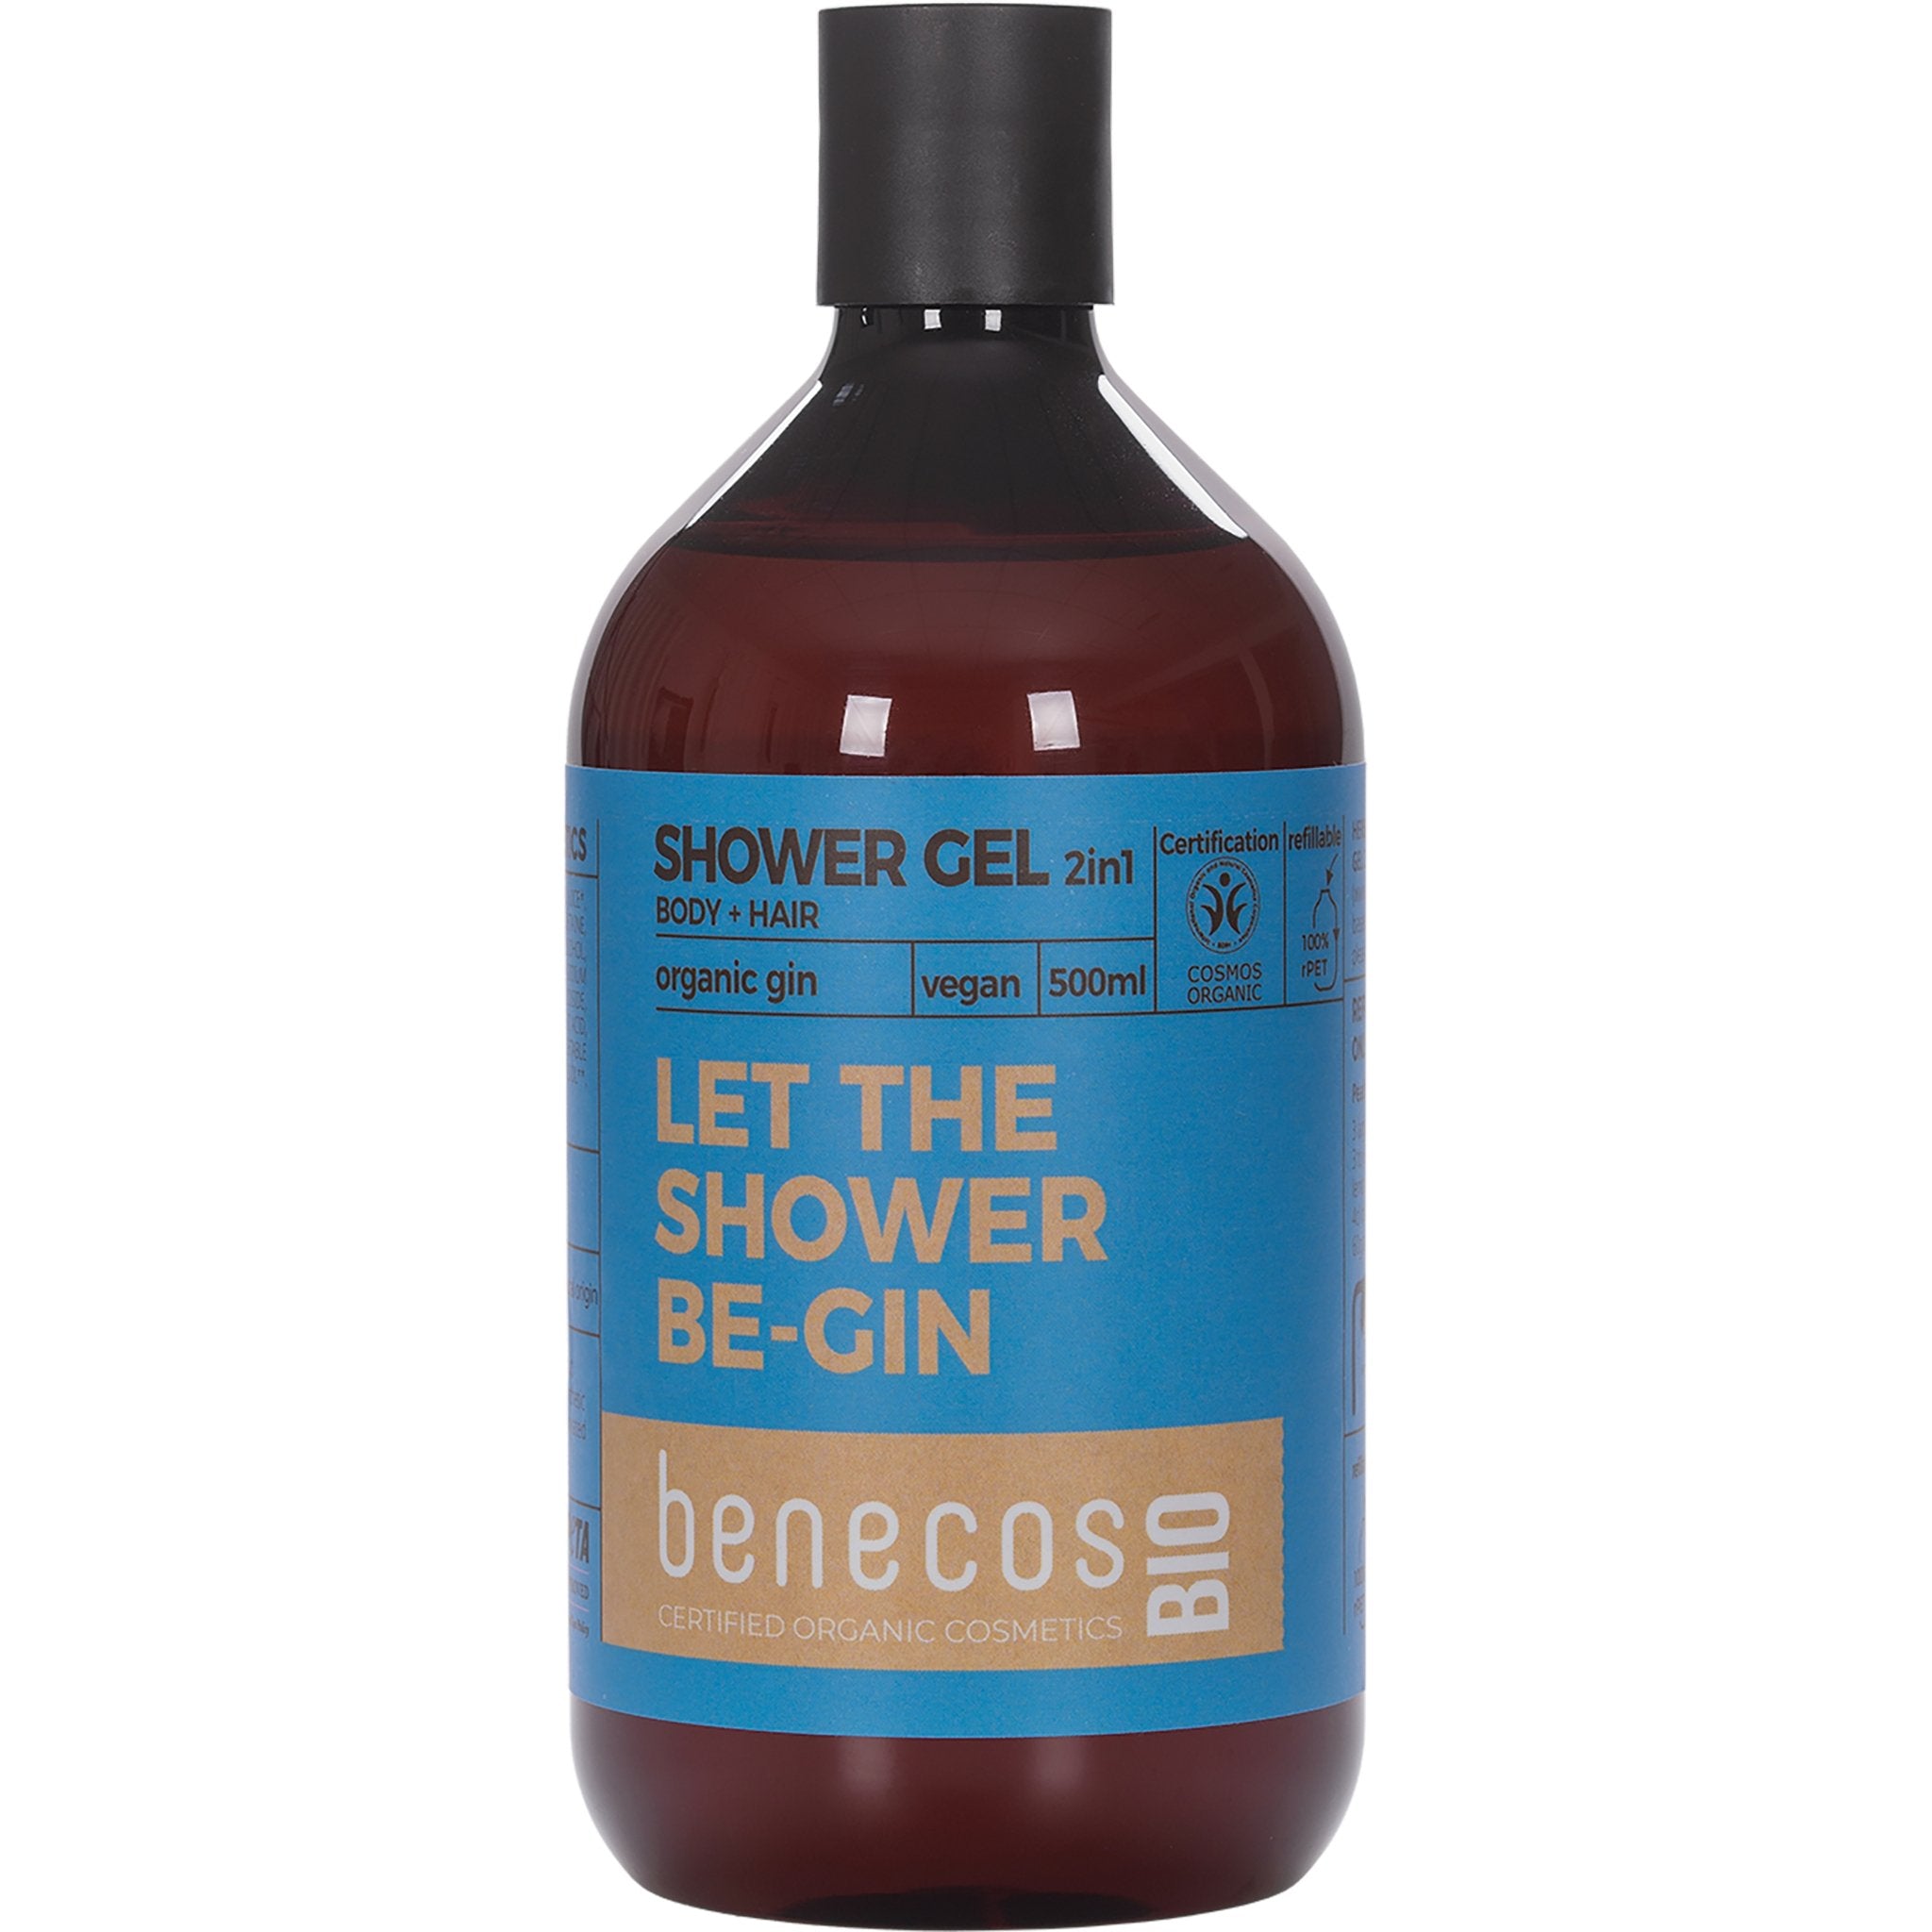 NEW Let The Shower Be-Gin 2in1 Hair & Body Wash - mypure.co.uk